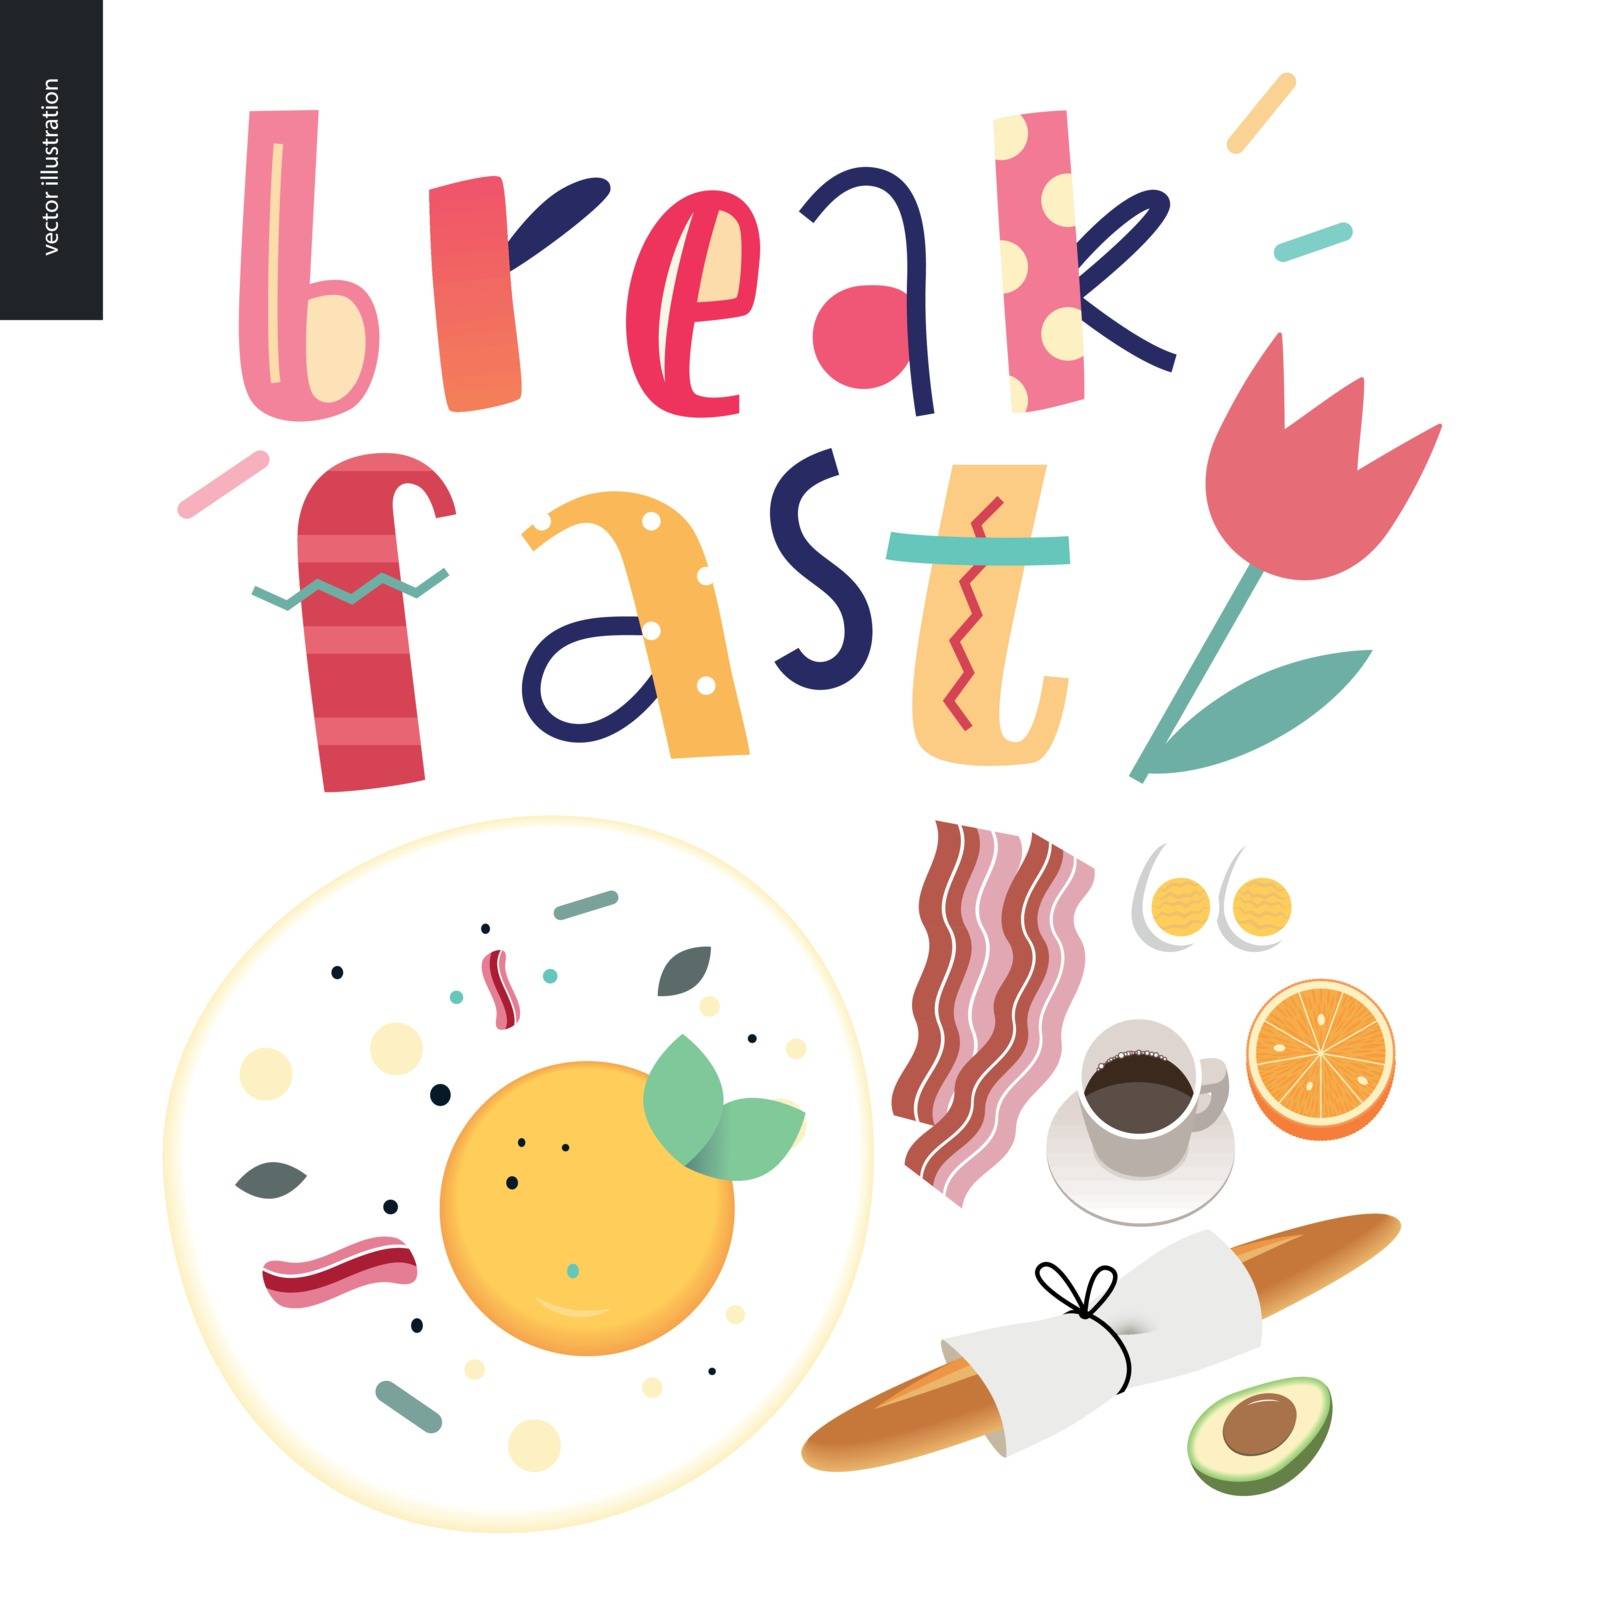 Love, spring, breakfast Lettering composition and a set of breakfast meal